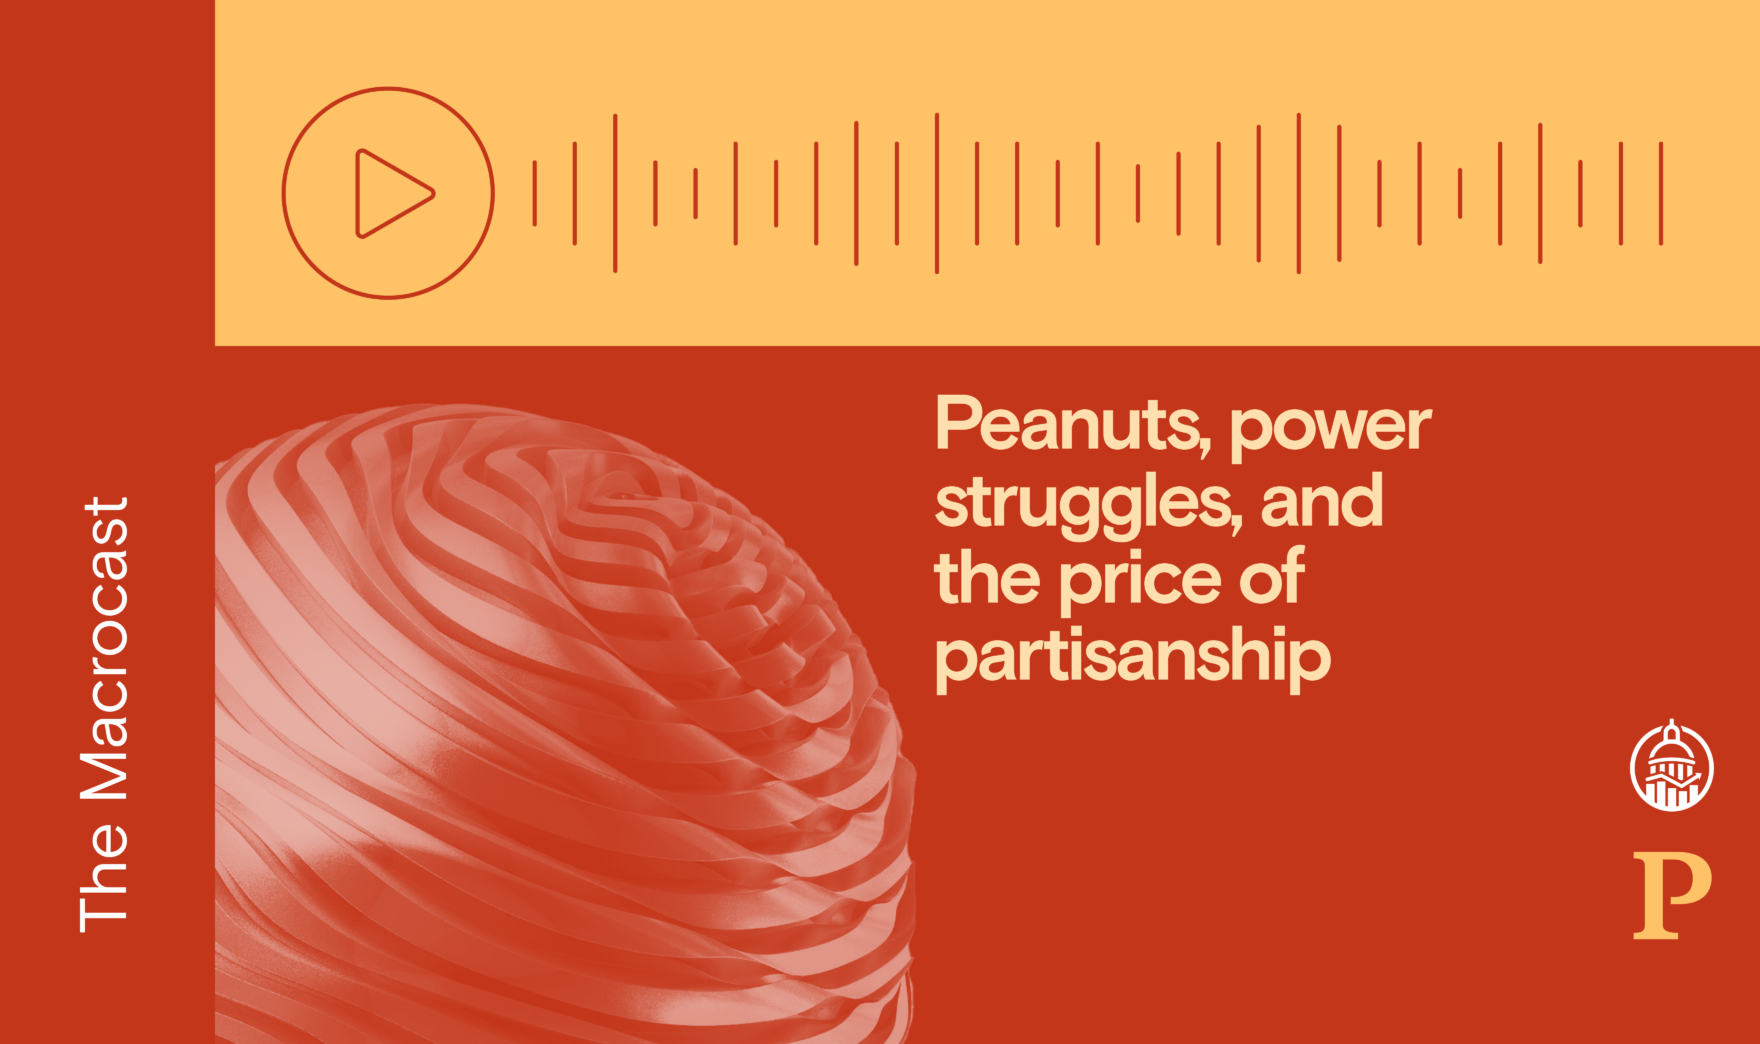 Macrocast: Peanuts, power struggles, and the price of partisanship